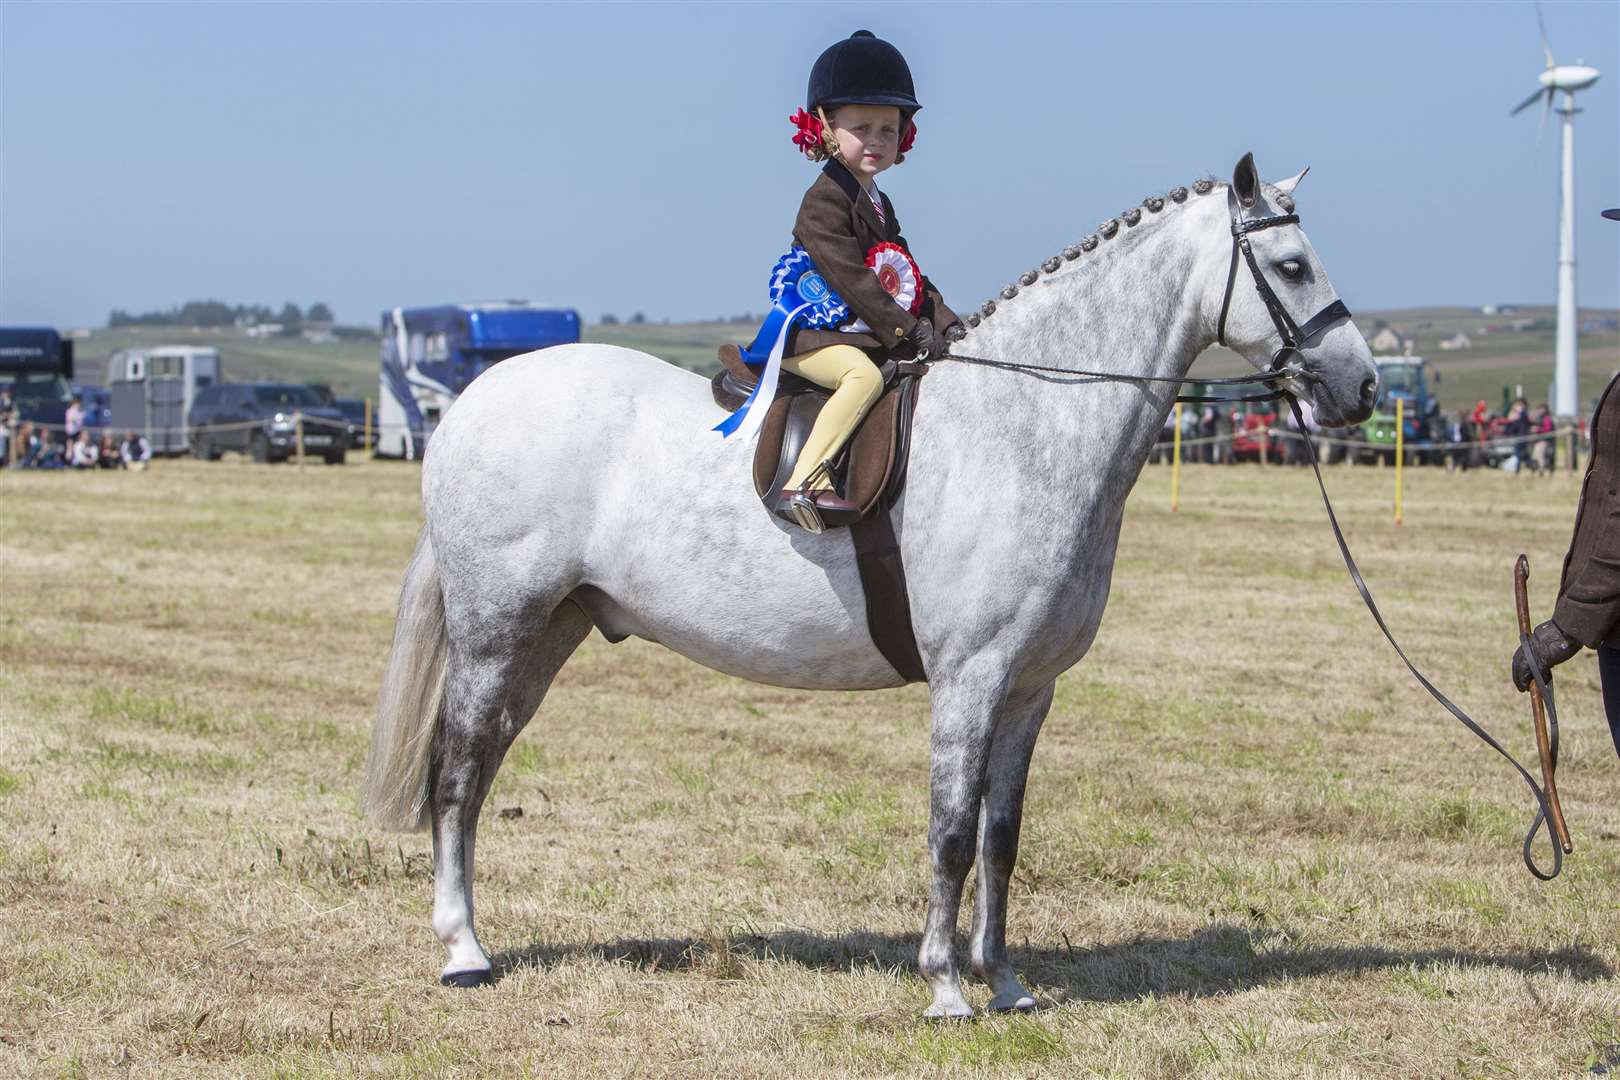 Five-year-old Zara Manson, of Sinclair Street, Halkirk, won the reserve supreme horse championship with the ridden pony champion, Rushfield White Knight, a six-year-old part-bred Dartmoor gelding. Picture: Robert MacDonald / Northern Studios